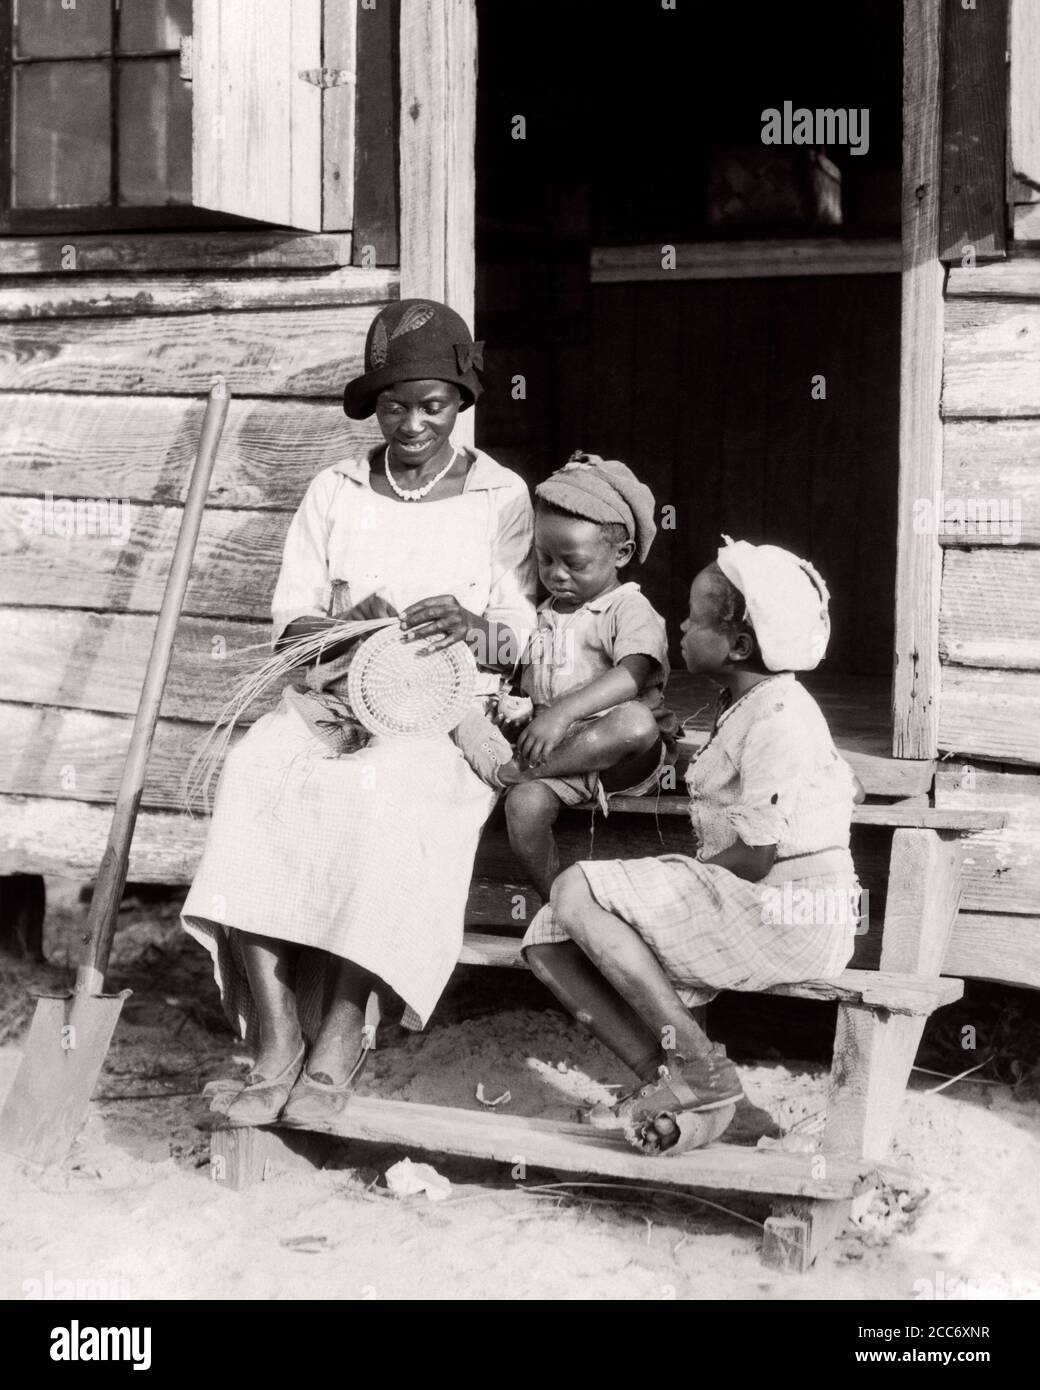 1930s AFRICAN-AMERICAN GULLAH MOTHER WEAVING A TOURIST BASKET SITTING ON STEPS TO CABIN WITH HER TWO CHILDREN SOUTH CAROLINA USA - n1209 HAR001 HARS 3 ART TRAVEL MOM CLOTHING STRESS NOSTALGIC PAIR BEAUTY COMMUNITY STEPS HER MOTHERS OLD TIME BUSY NOSTALGIA BROTHER OLD FASHION SISTER POVERTY 1 JUVENILE STYLE LOST SONS FAMILIES LIFESTYLE FEMALES HOUSES BROTHERS POOR RURAL HOME LIFE UNITED STATES COPY SPACE FULL-LENGTH LADIES DAUGHTERS PERSONS RESIDENTIAL UNITED STATES OF AMERICA CARING MALES BUILDINGS CABIN CRAFT SIBLINGS SISTERS B&W SADNESS NORTH AMERICA FREEDOM NORTH AMERICAN SKILL SOUVENIR Stock Photo